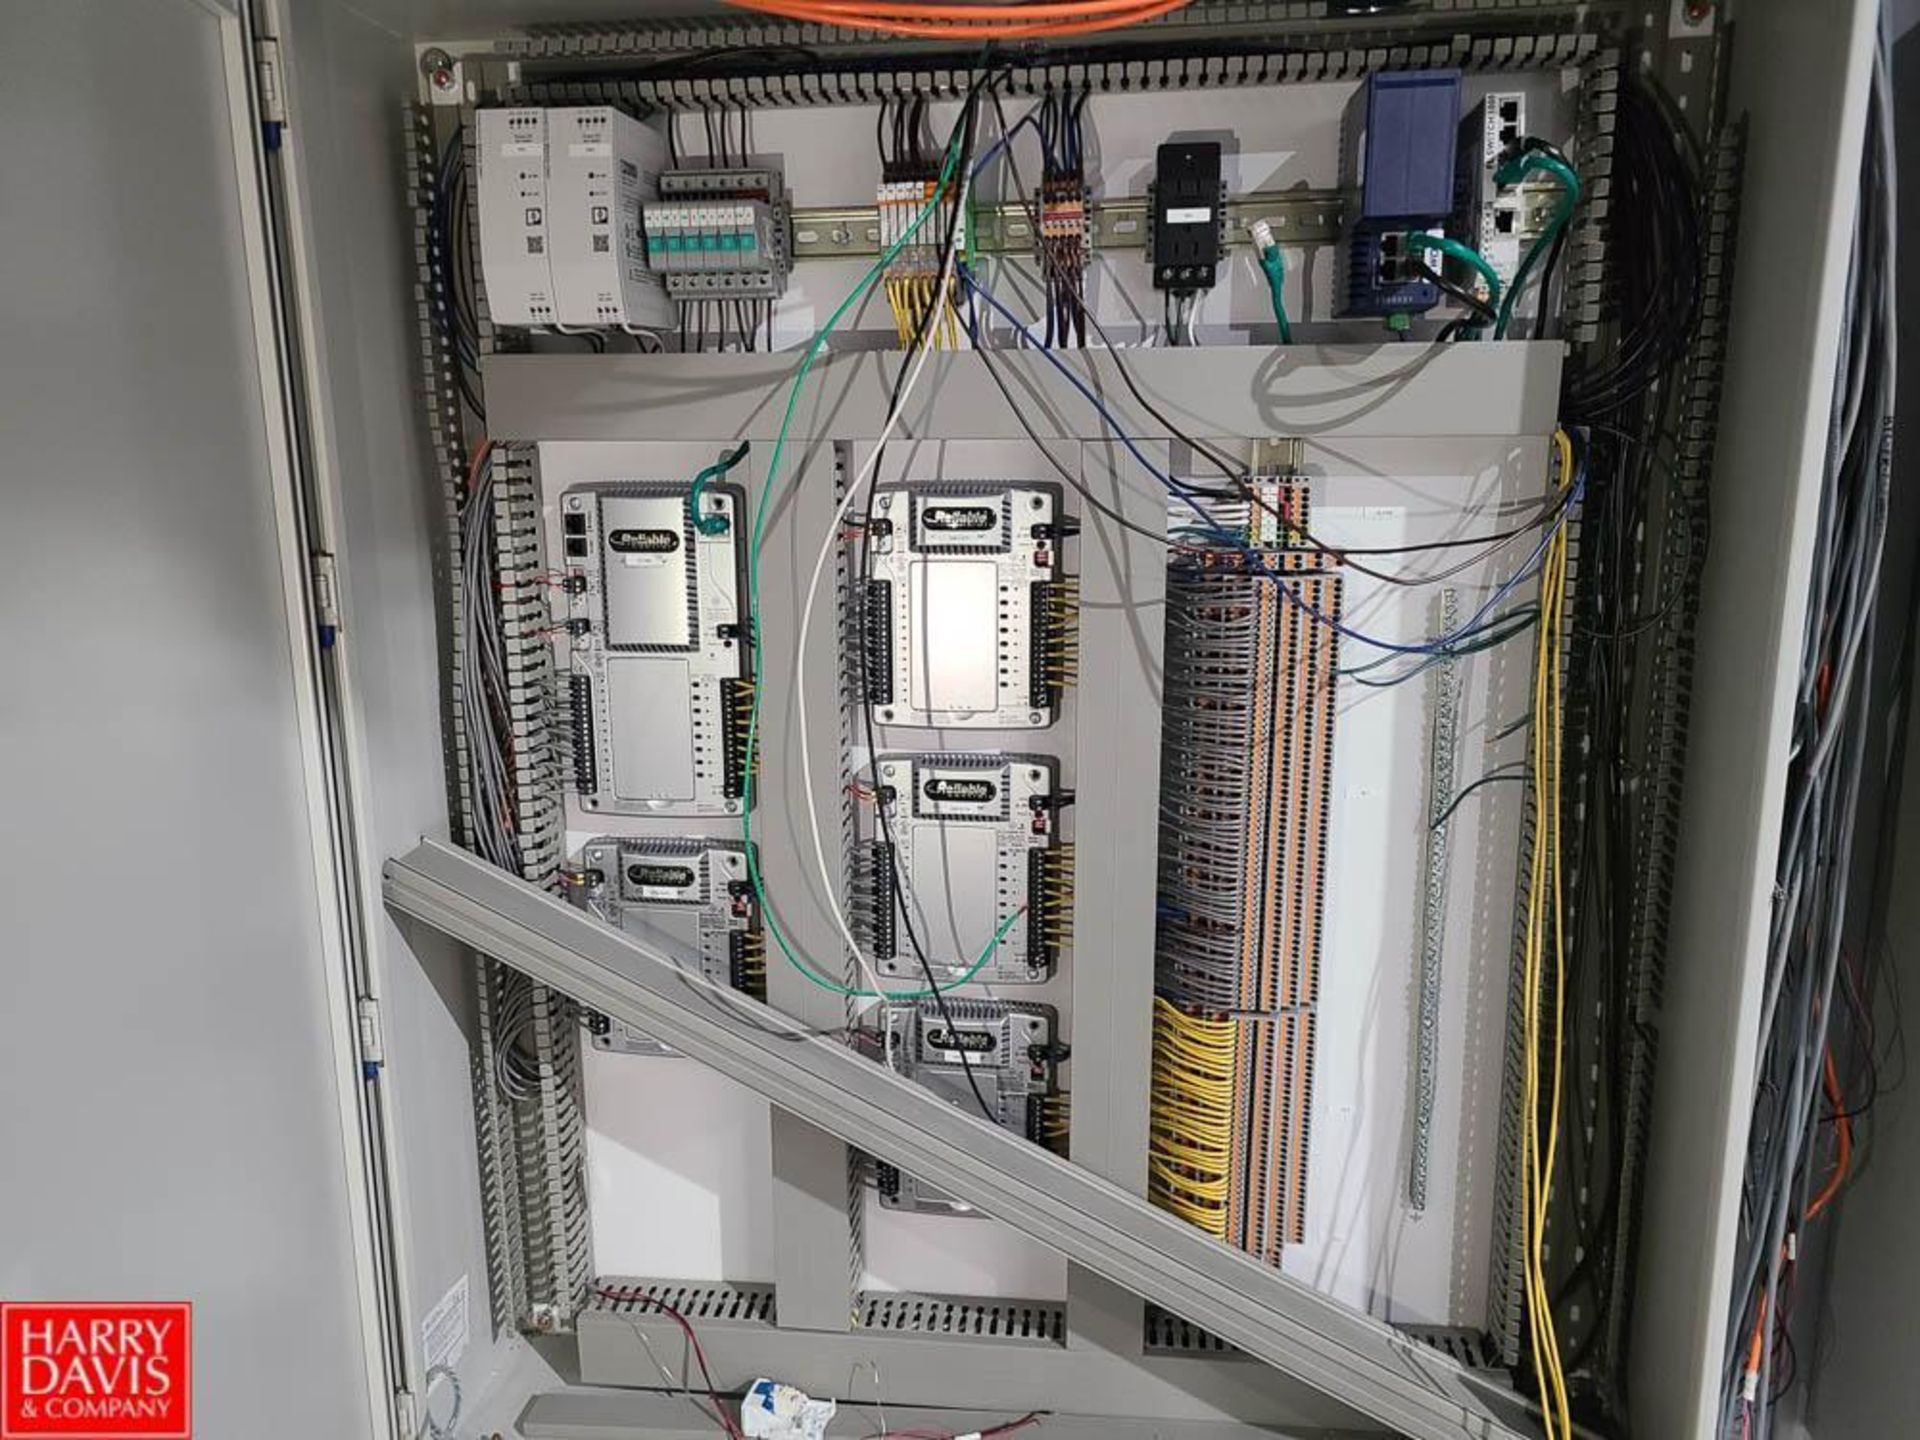 2021 Soteck (2) PLC Control Panels with Controls - Rigging Fee: $200